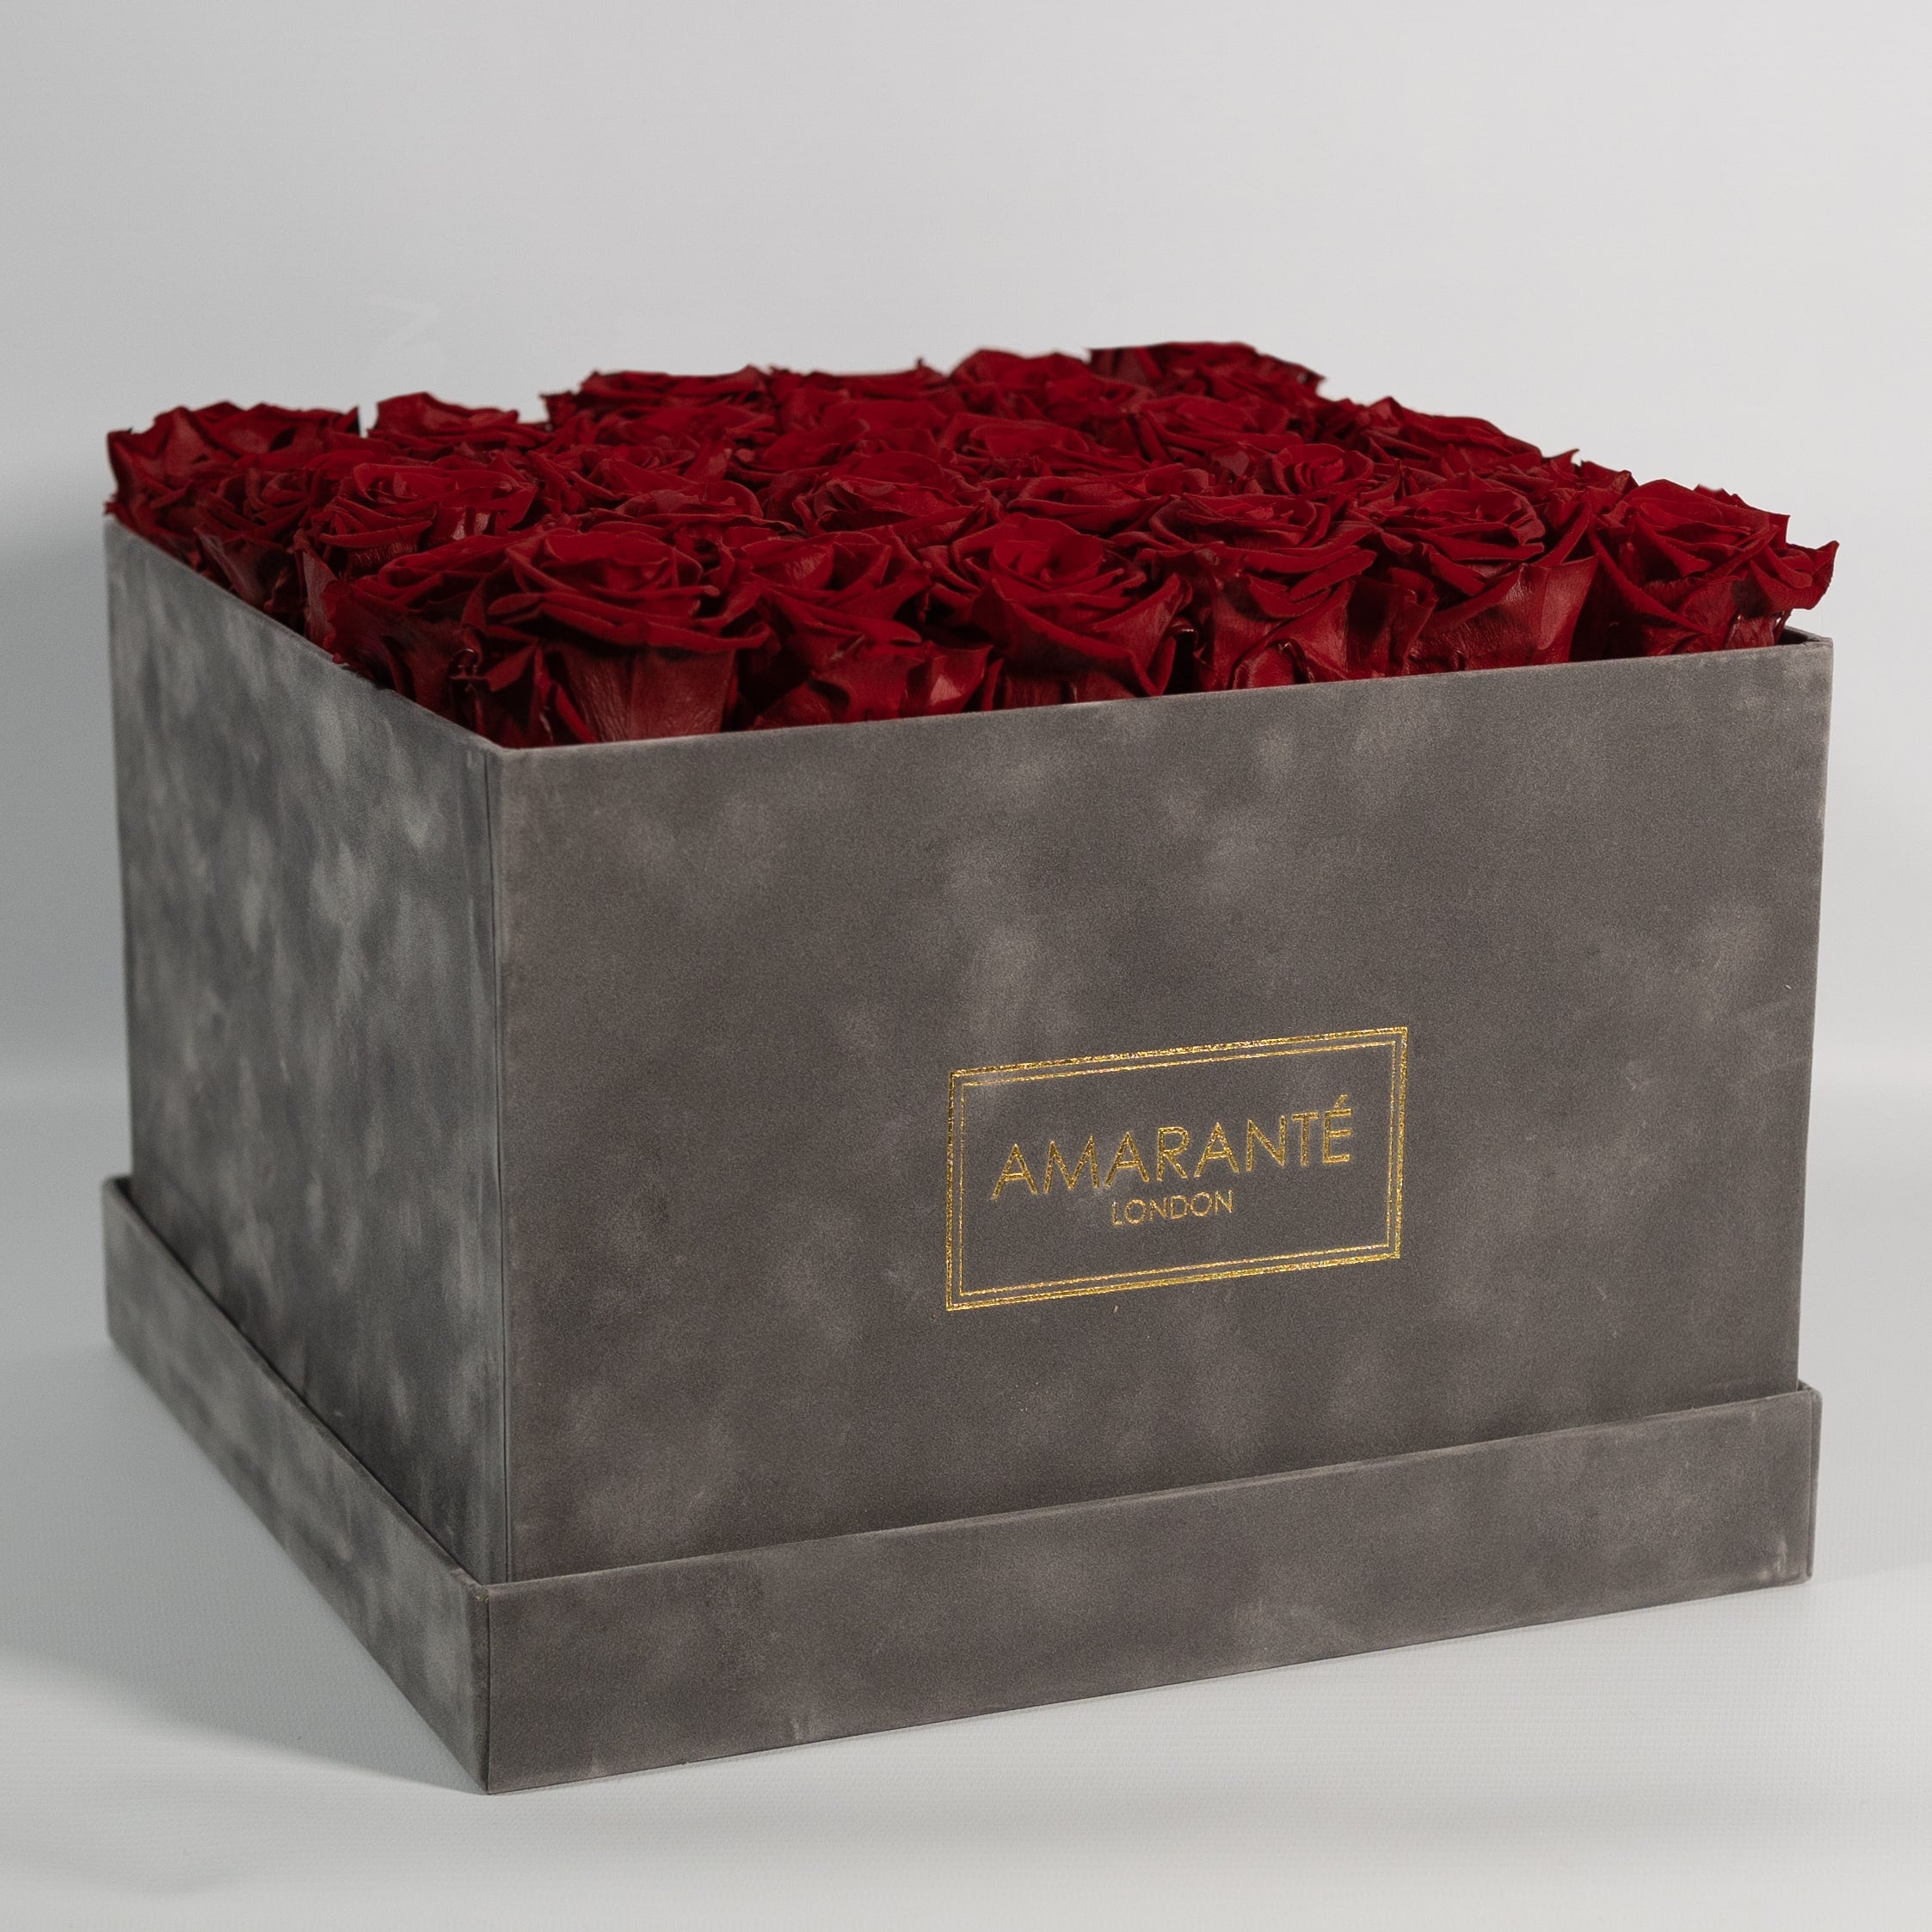 Dapper wine red Roses featured in a stylish grey package. 